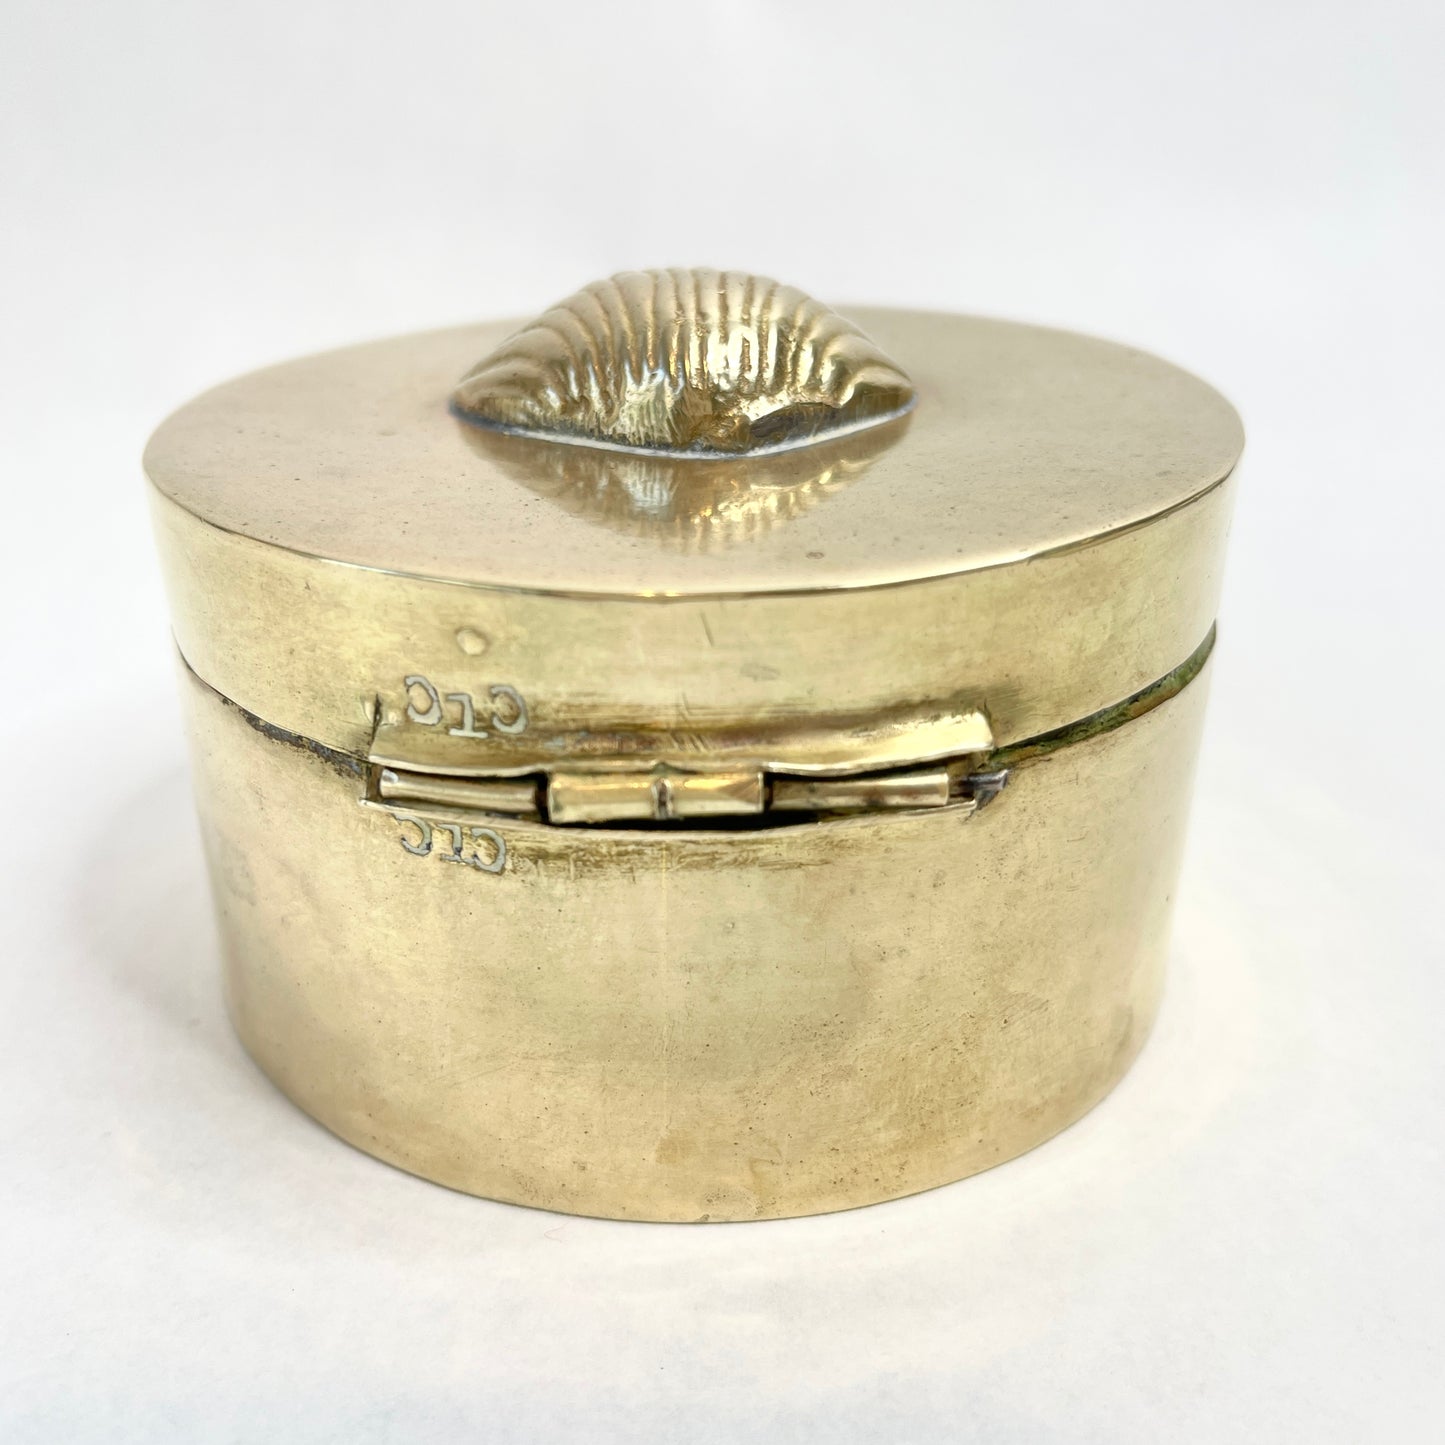 Vintage Brass Box Round with Scallop Shell